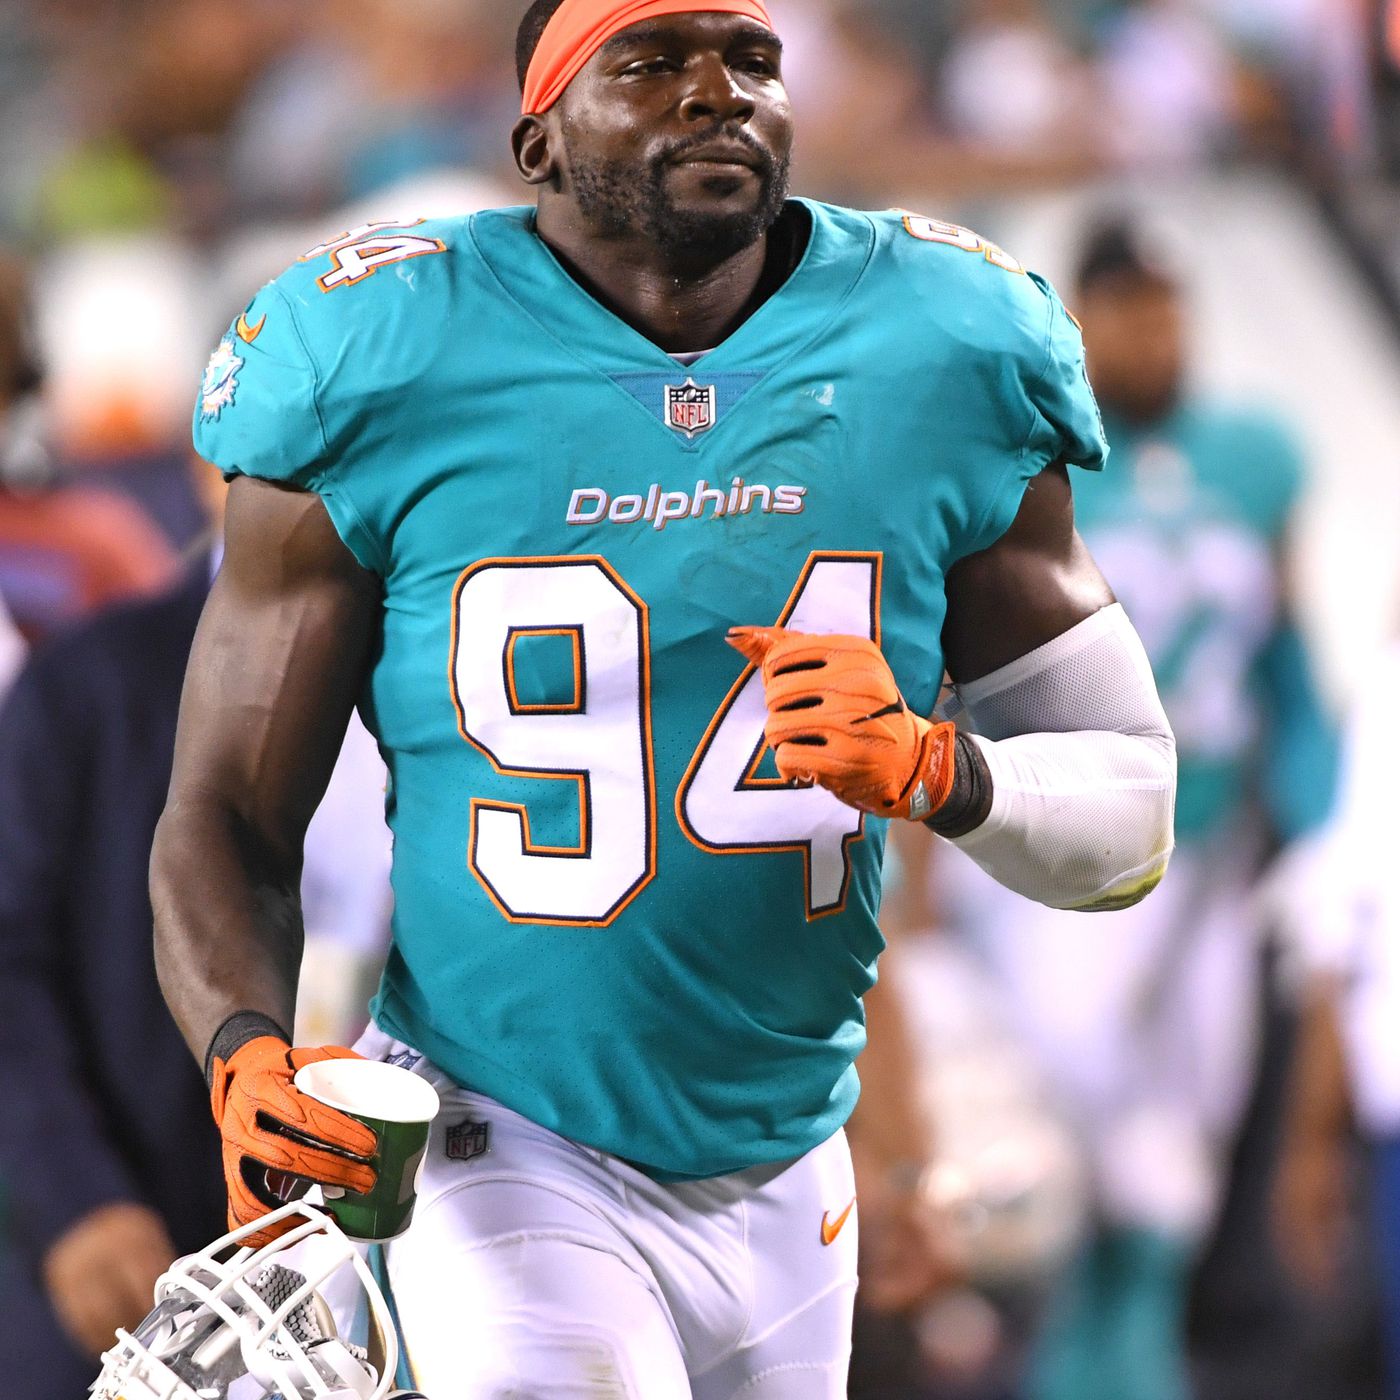 Dolphins linebacker Lawrence Timmons not with team - The Phinsider